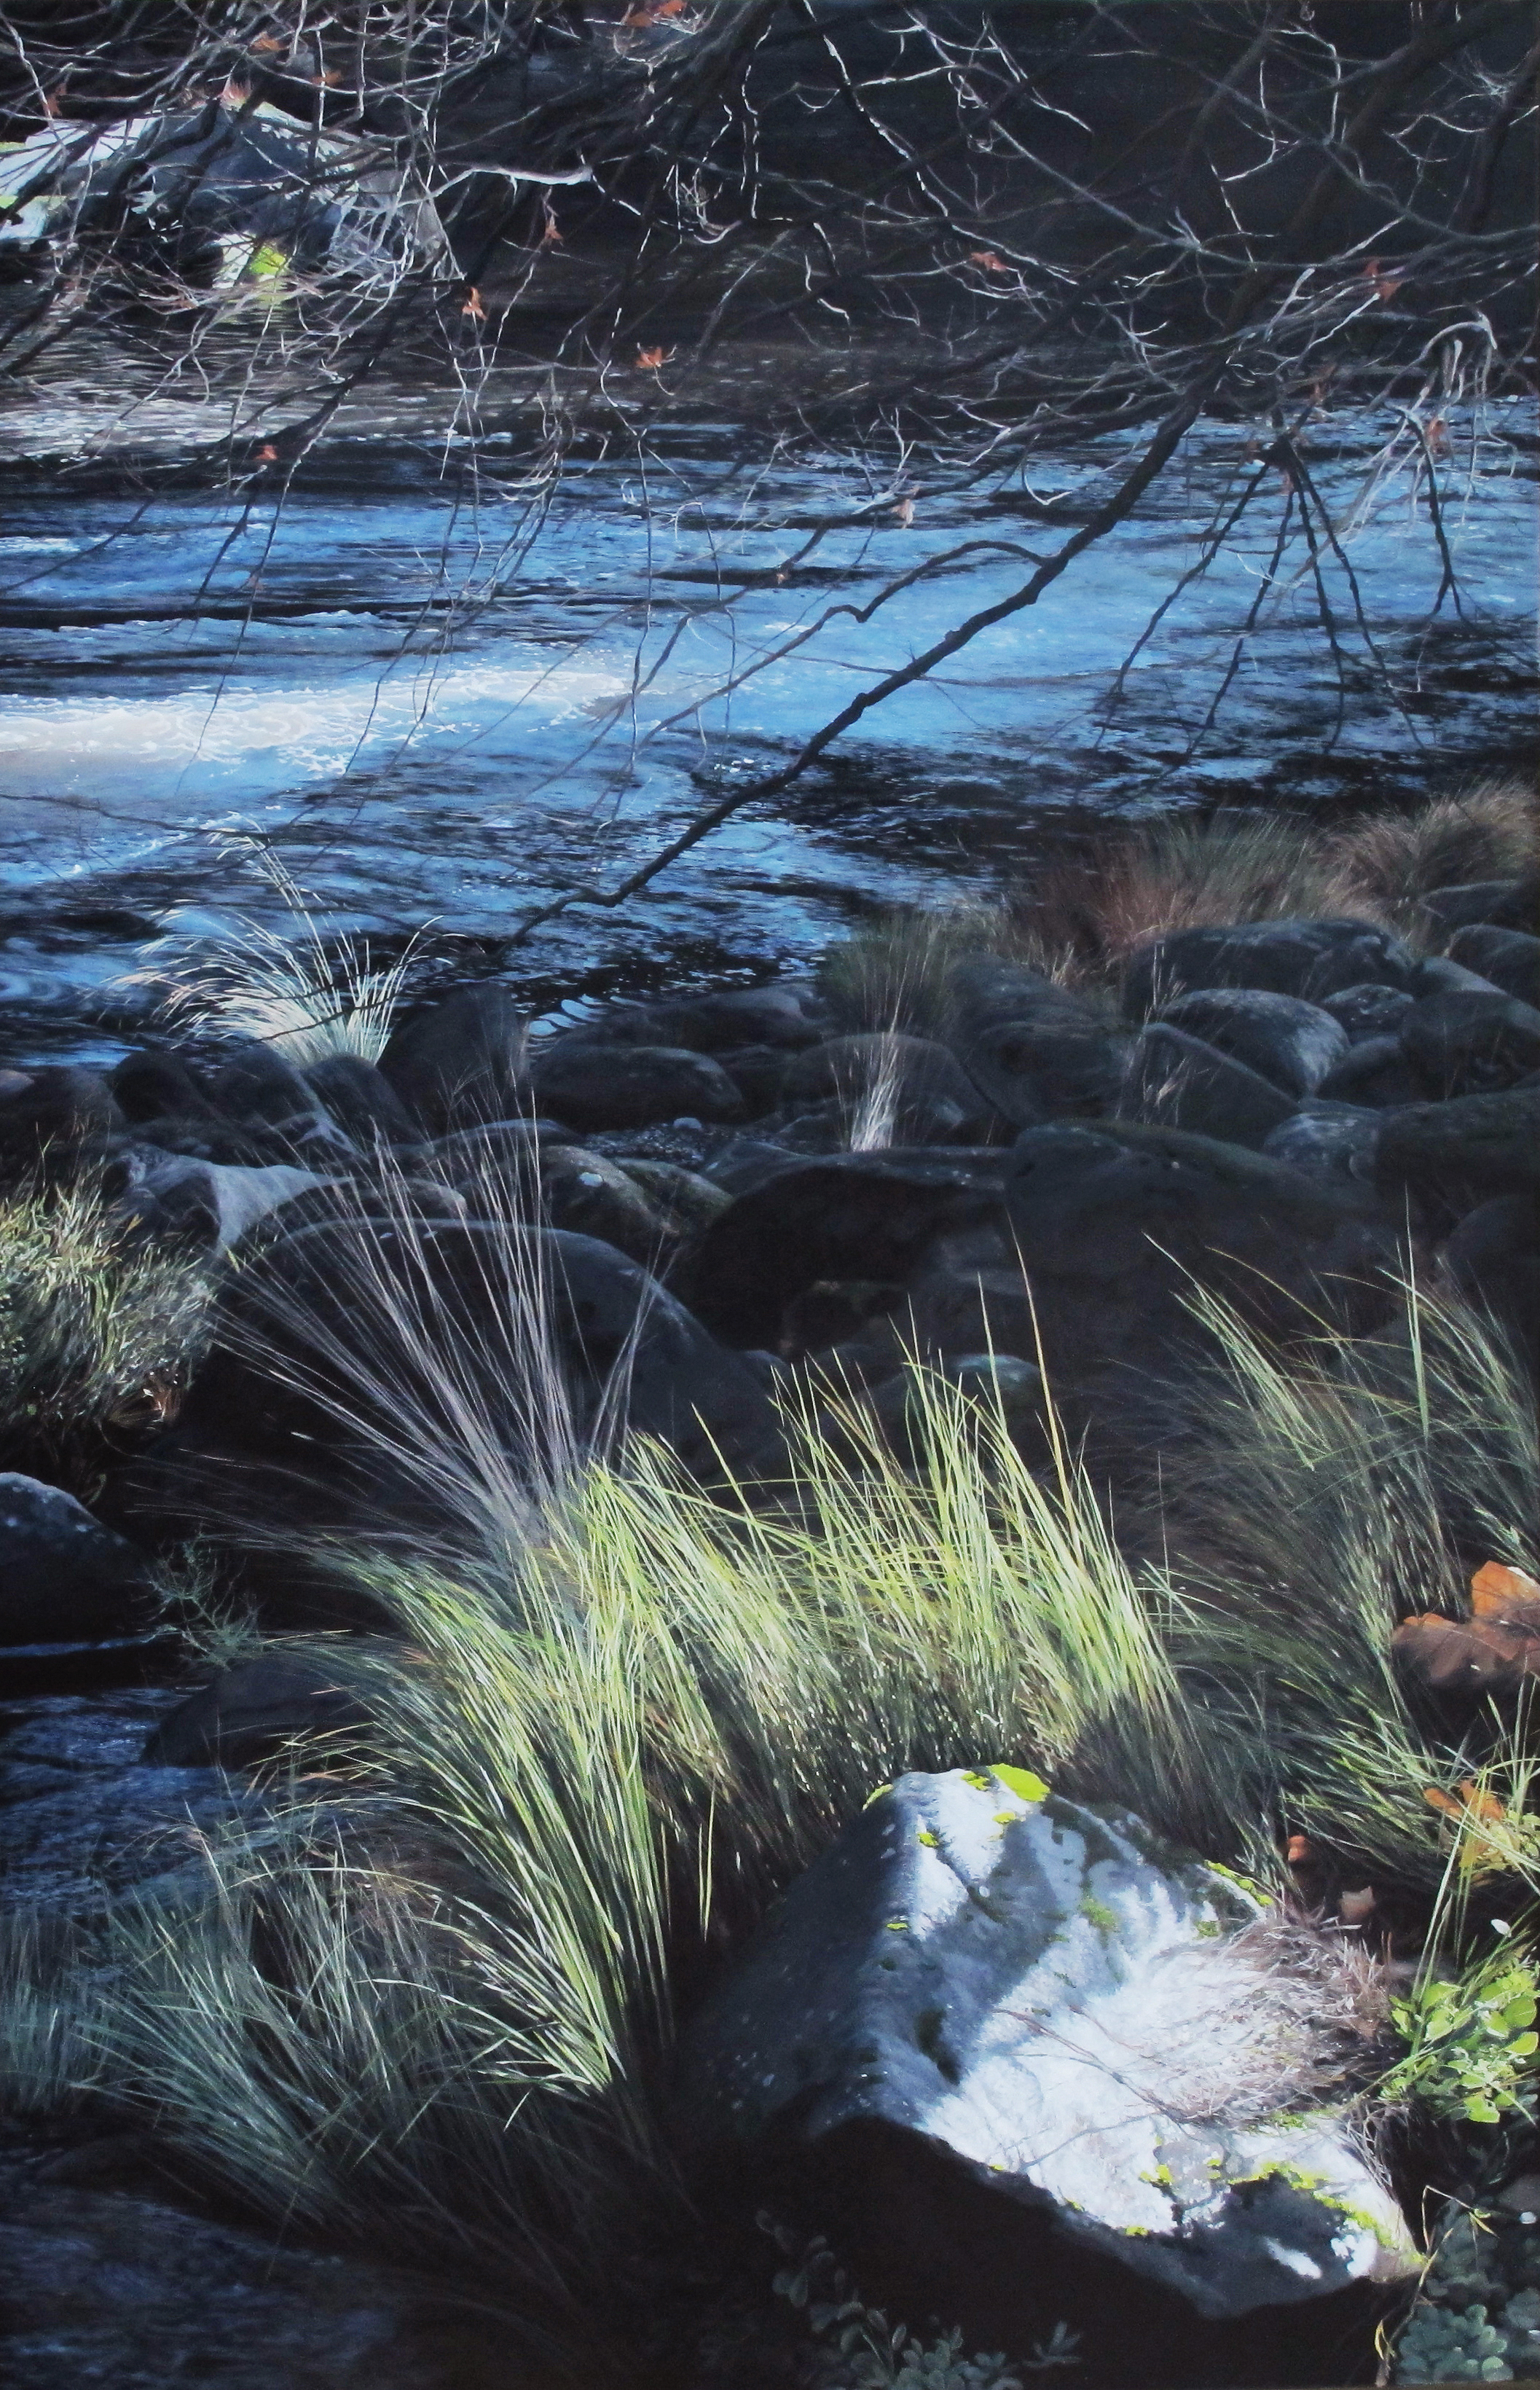   Winter In Cataract Gorge  135x210cm Oil on Canvas SOLD 